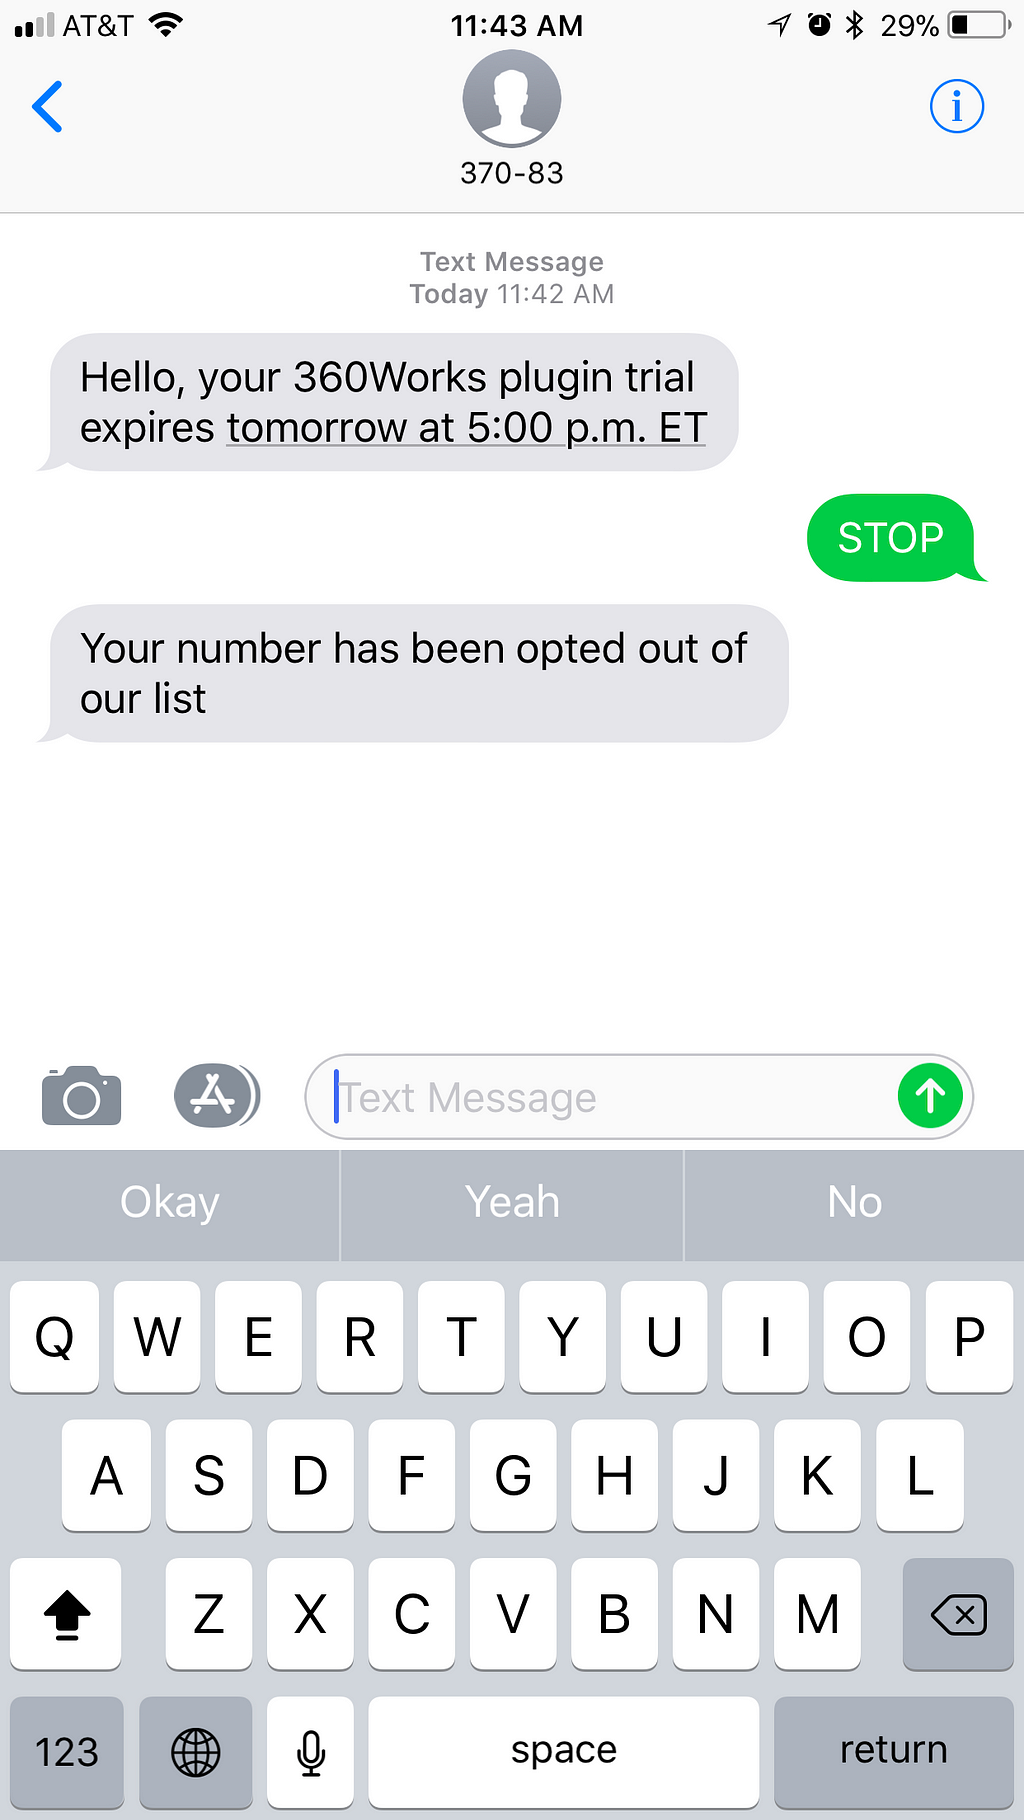 sms text message sent to customer from FileMaker with 360Works Email Plugin